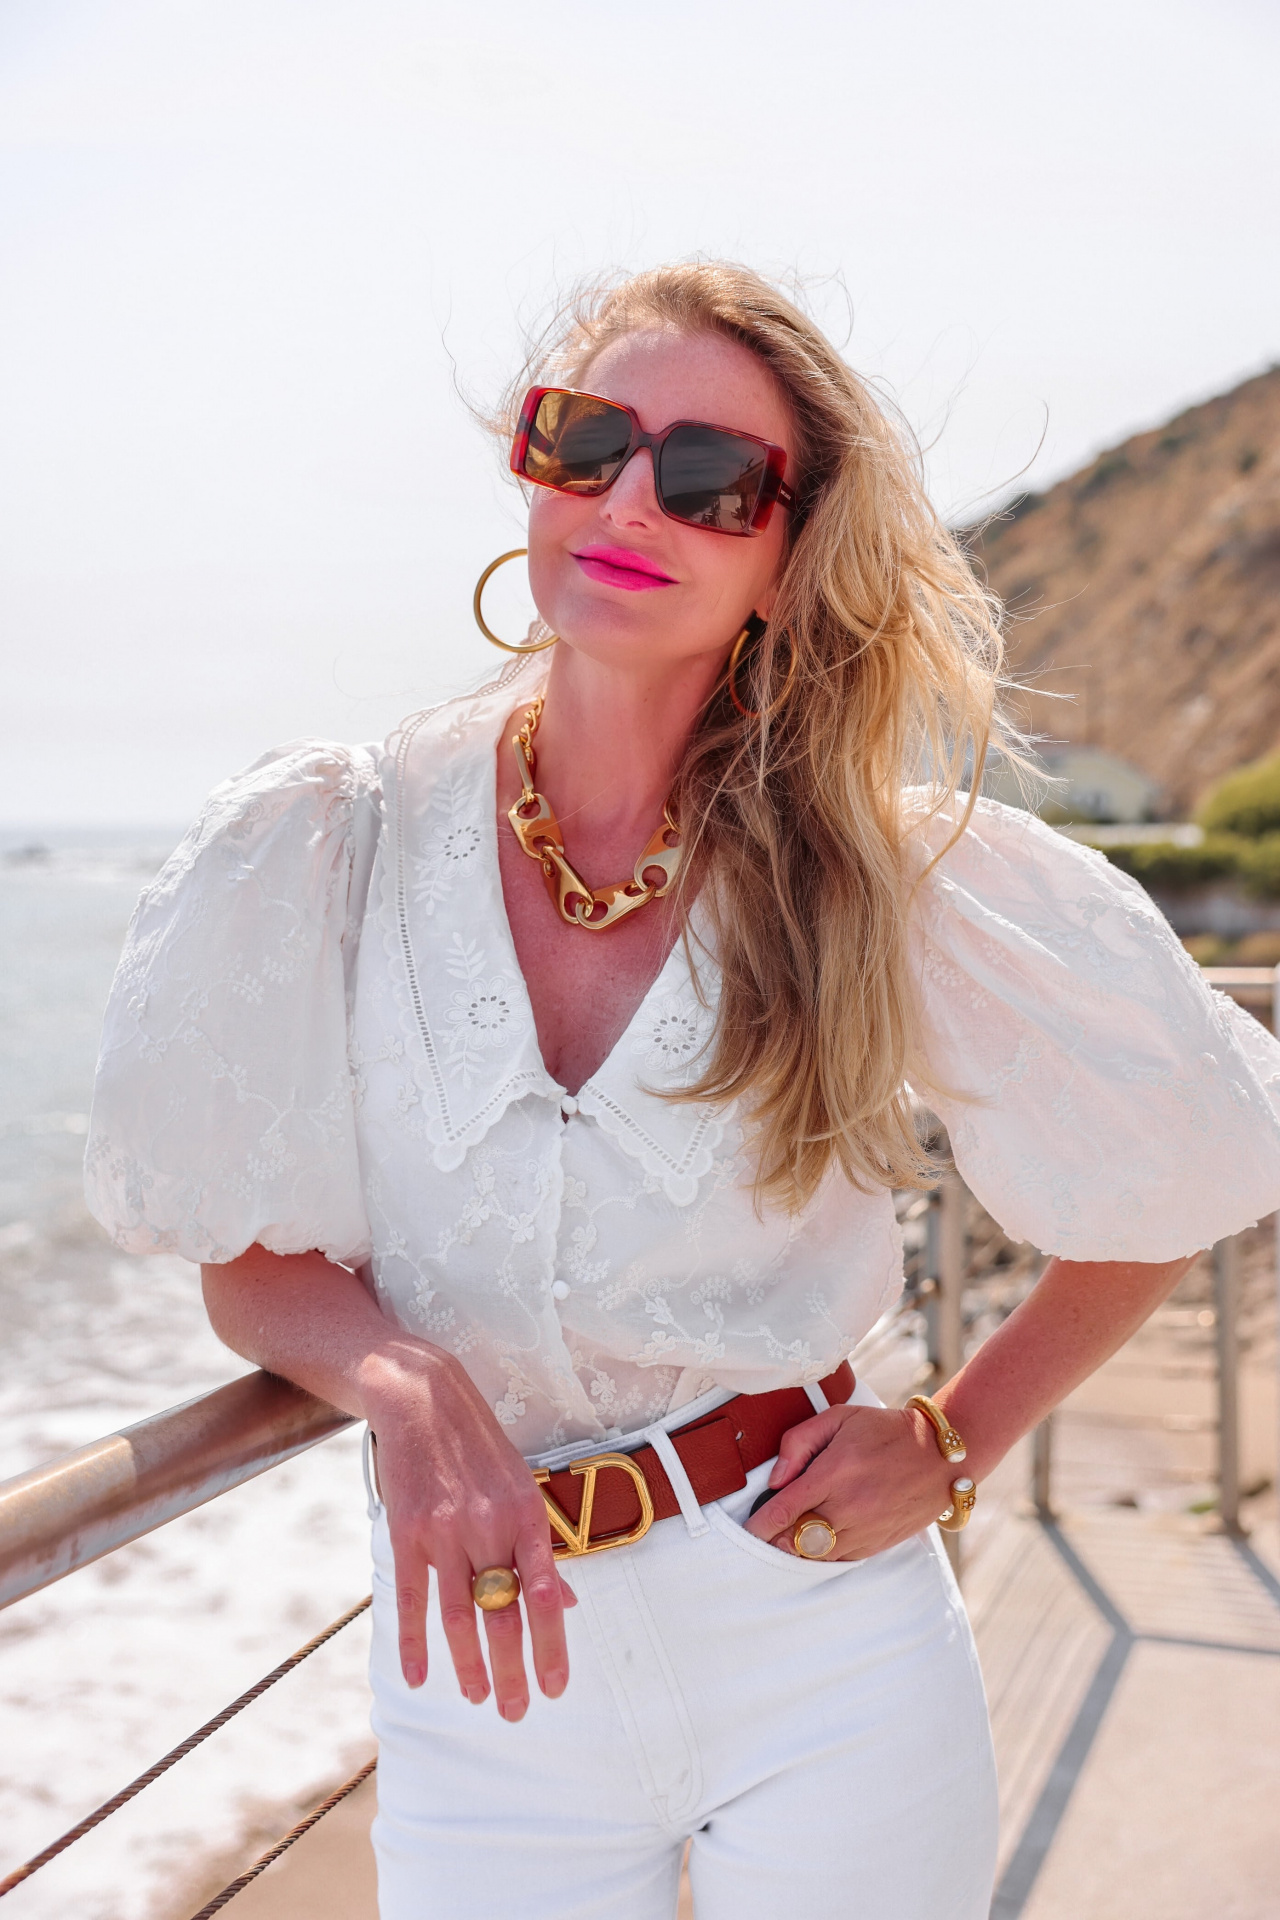 summer mom style, best summer mom outfits, summer mom outfits 2022, casual mom outfits summer, stylish mom outfits 2022, fashion for moms in their 30s, fashion for moms in their 40s, cute mom outfits, casual mom outfits, erin busbee, busbee style, fashion over 40, malibu, california, white maje blouse, white mother hustler jeans, see by chloe platform heels, saint laurent square sunglasses, paco rabbane chunky gold necklace, dean davidson hoops